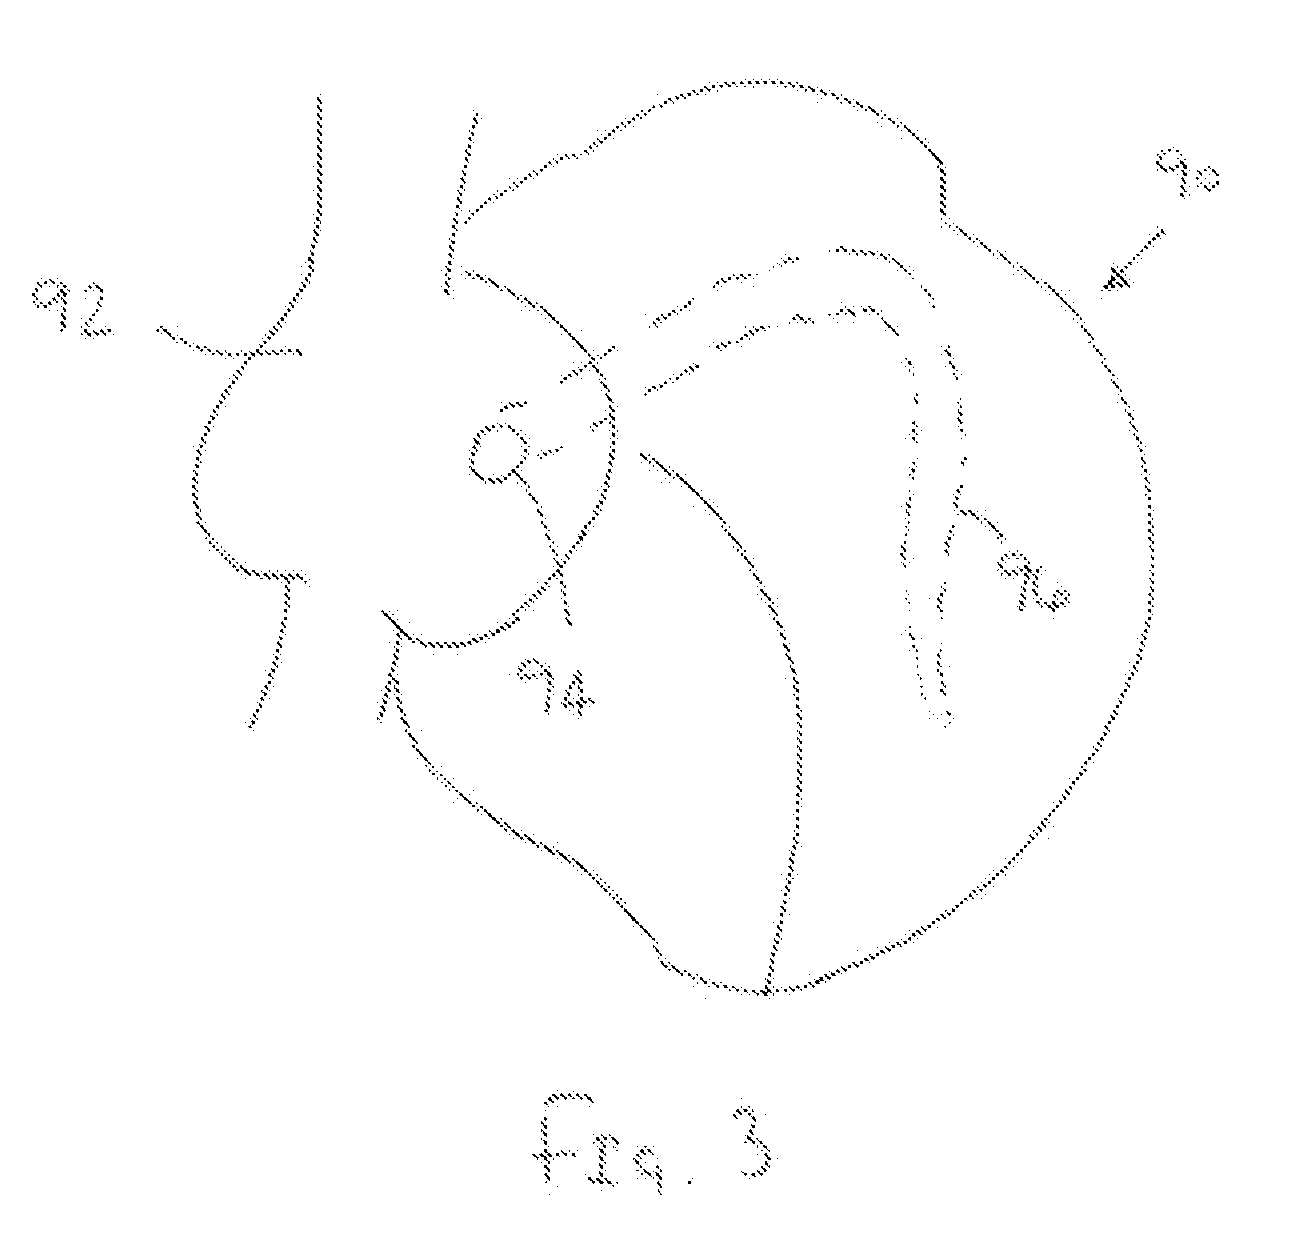 Apparatus and methods for delivering transvenous leads